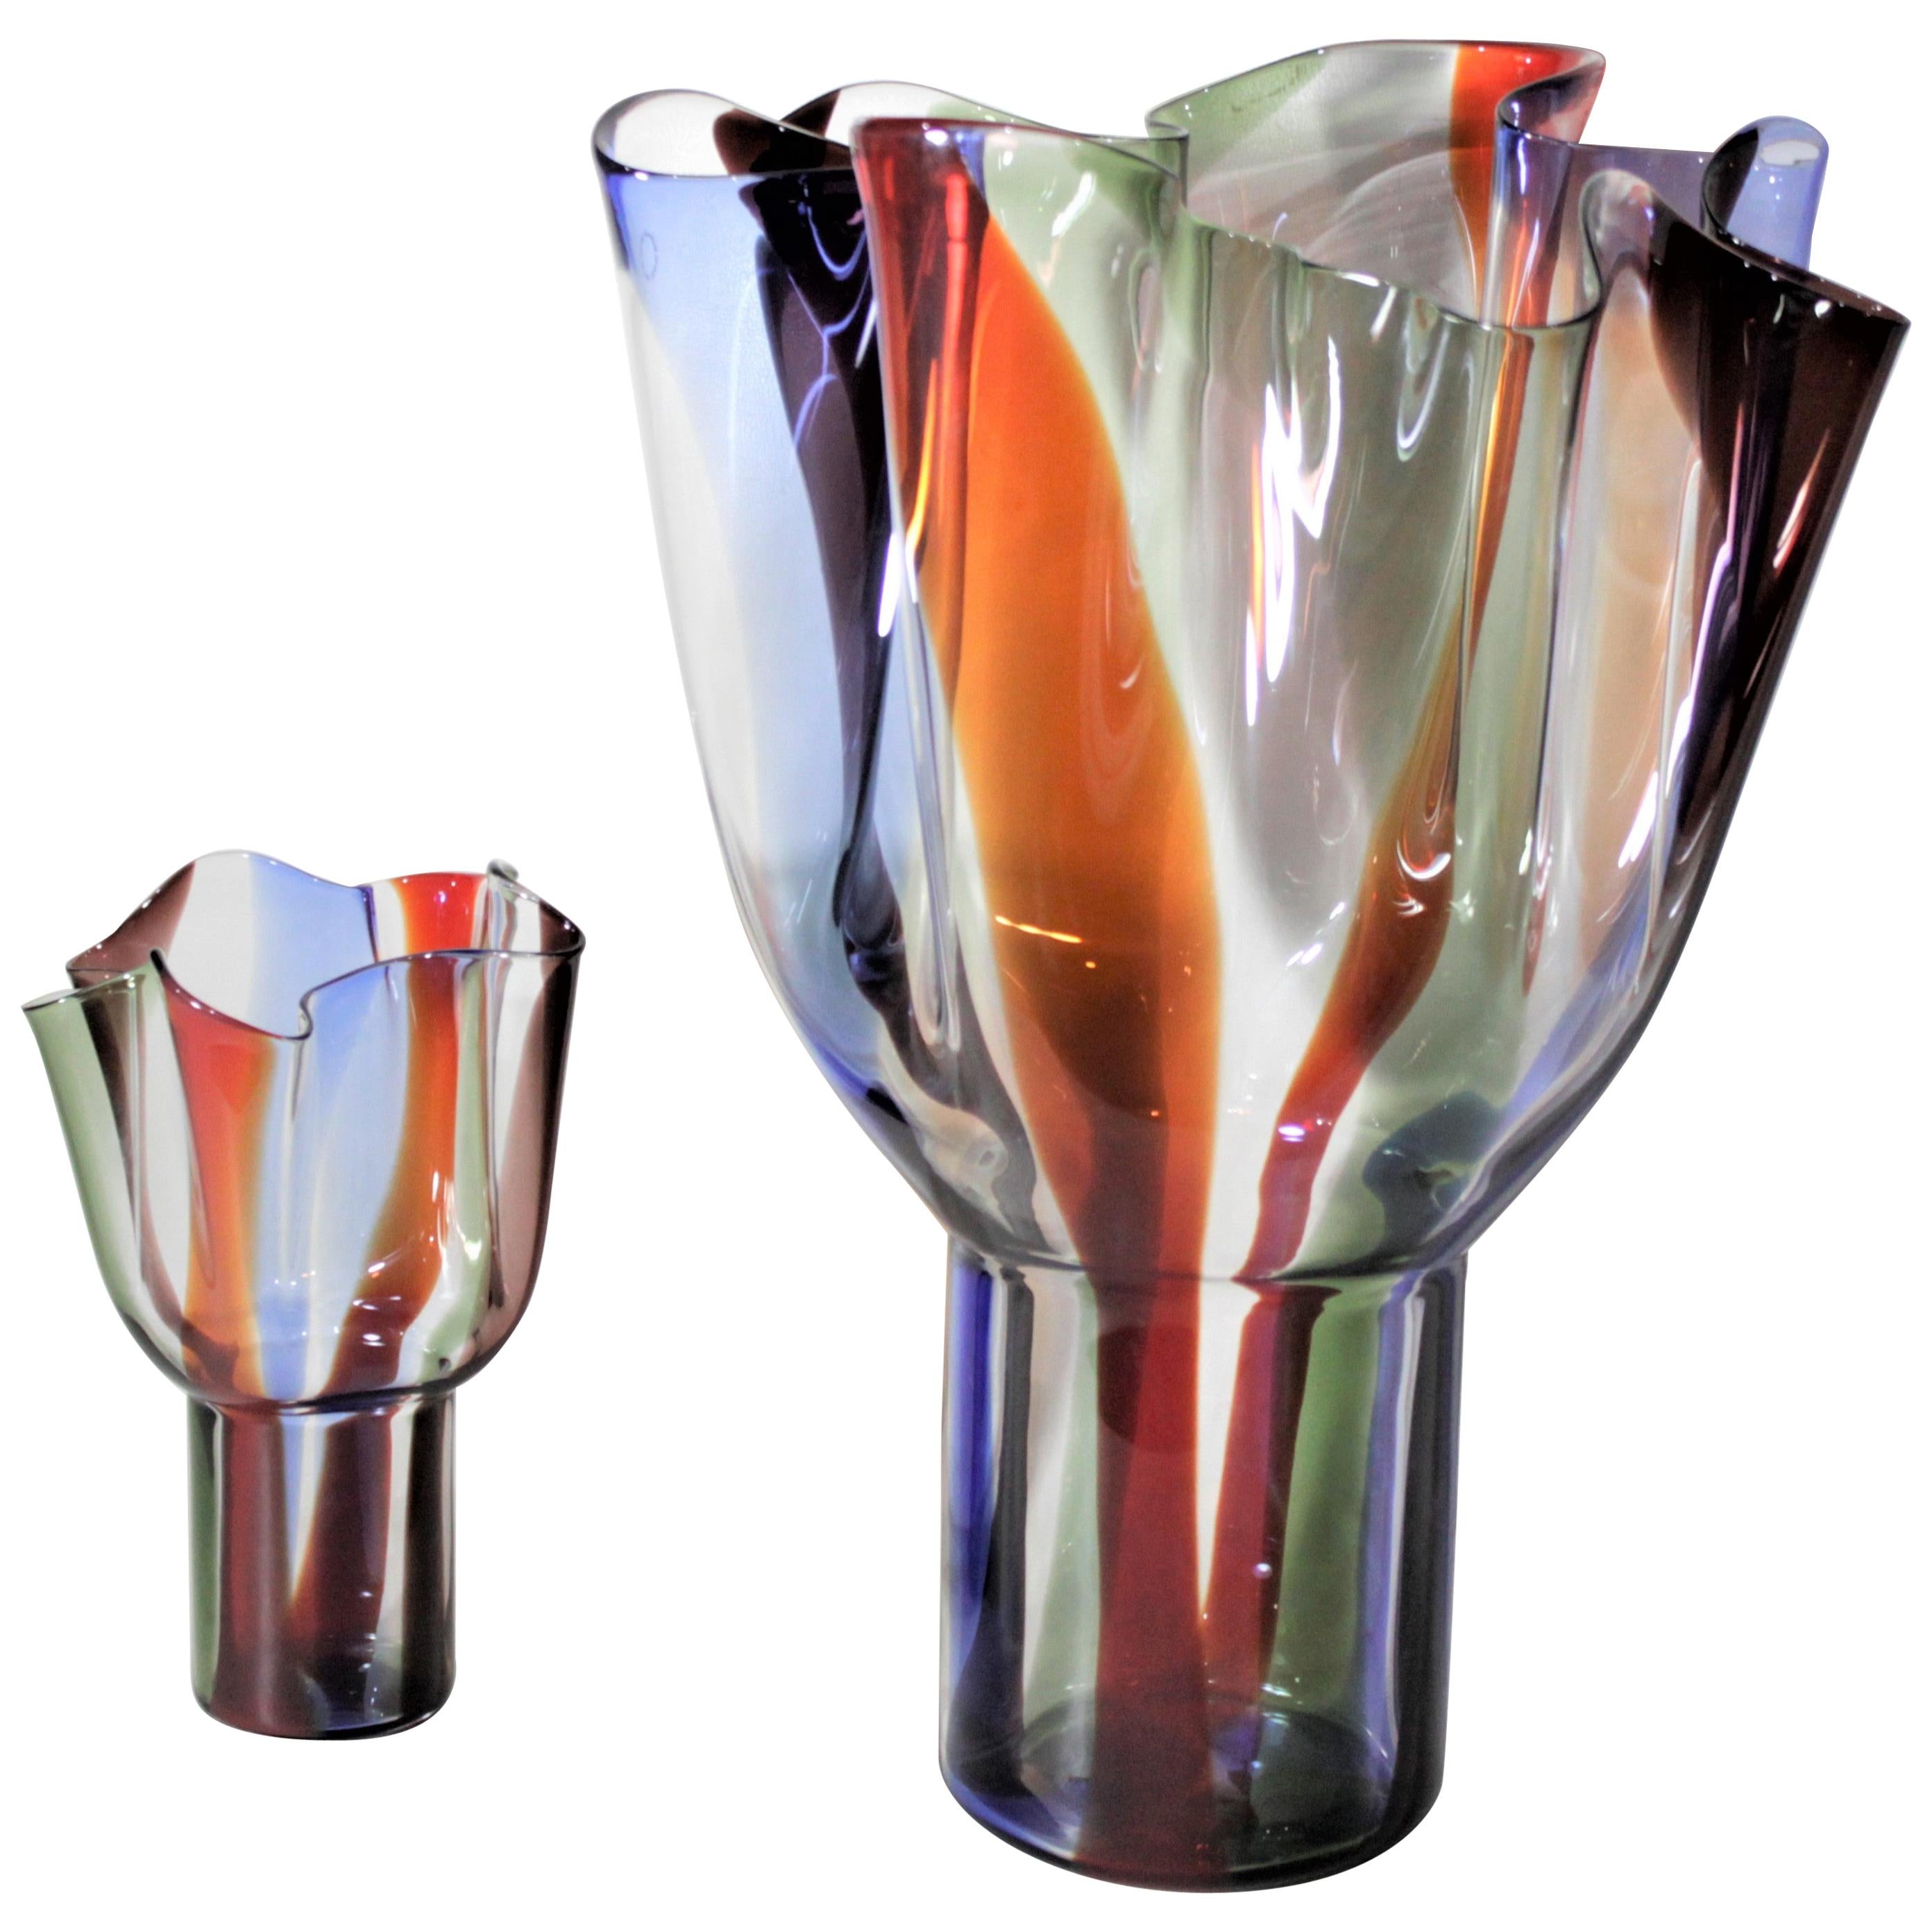 Pair of Mid-Century Modern Styled Venini Art Glass Kukinto Vases by Sarpeneva For Sale